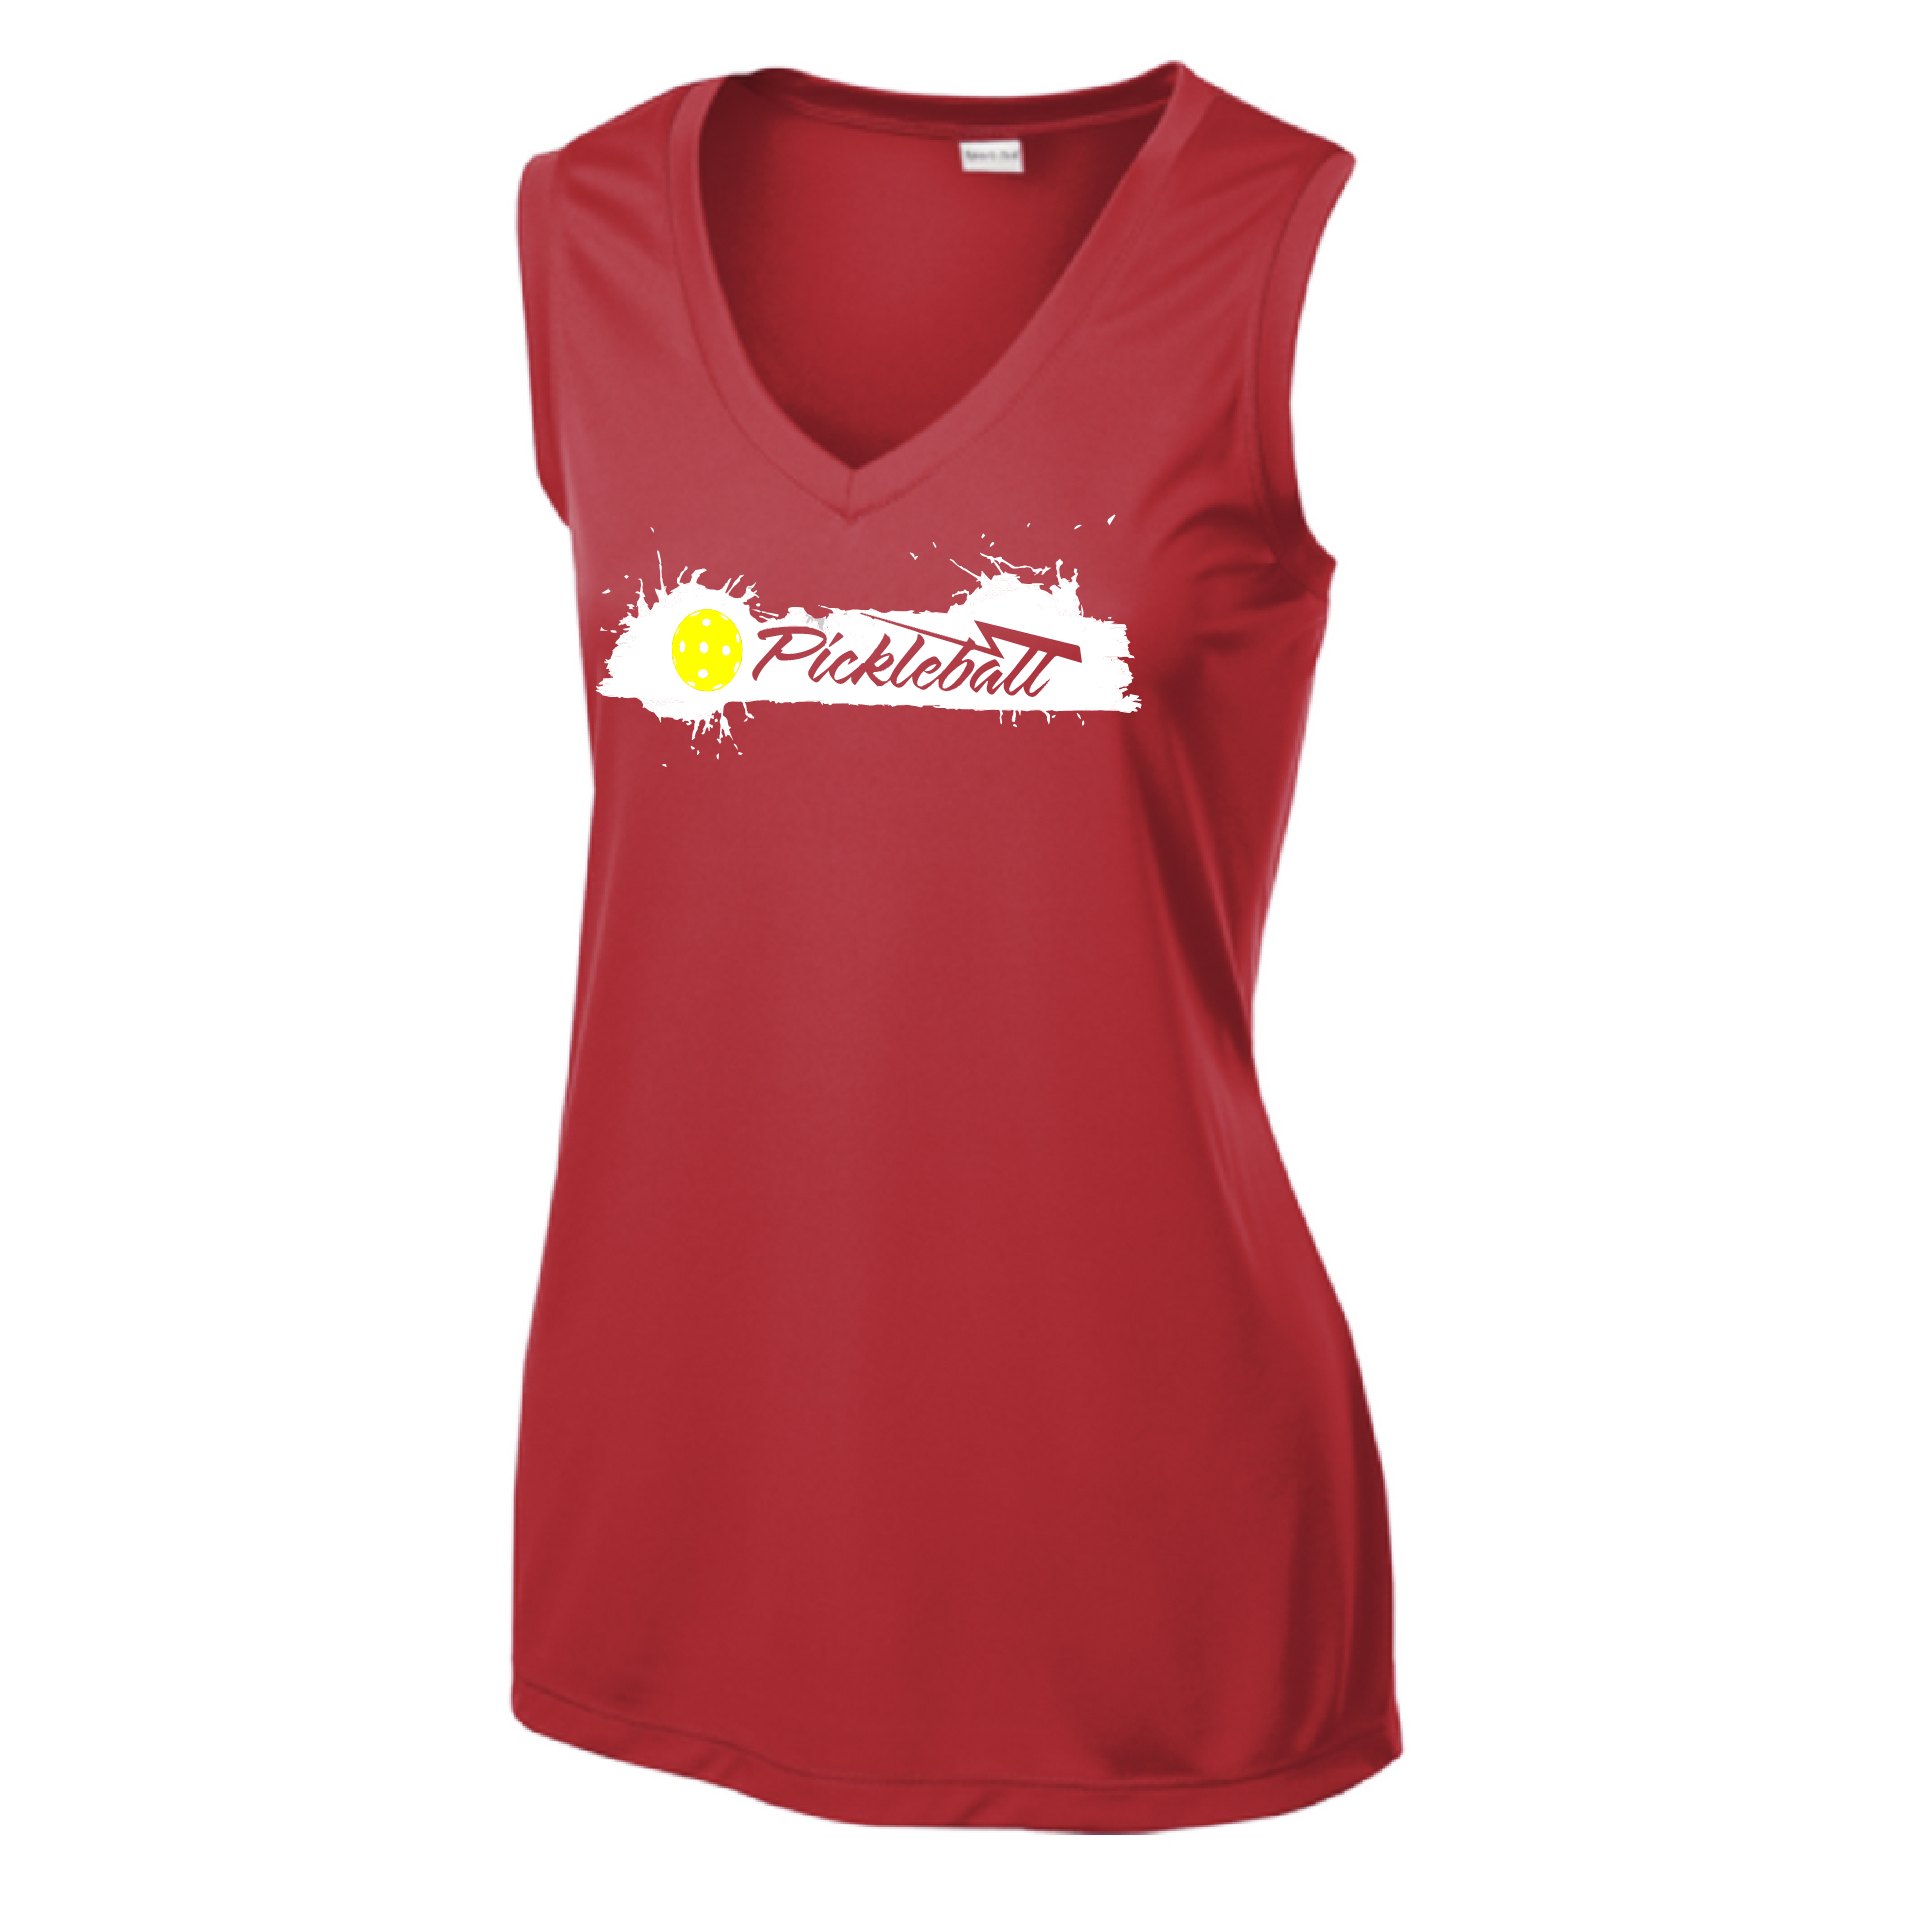 Pickleball Design: Extreme  Women's Style: Sleeveless V-Neck  Turn up the volume in this Women's shirt with its perfect mix of softness and attitude. Material is ultra-comfortable with moisture wicking properties and tri-blend softness. PosiCharge technology locks in color. Highly breathable and lightweight.